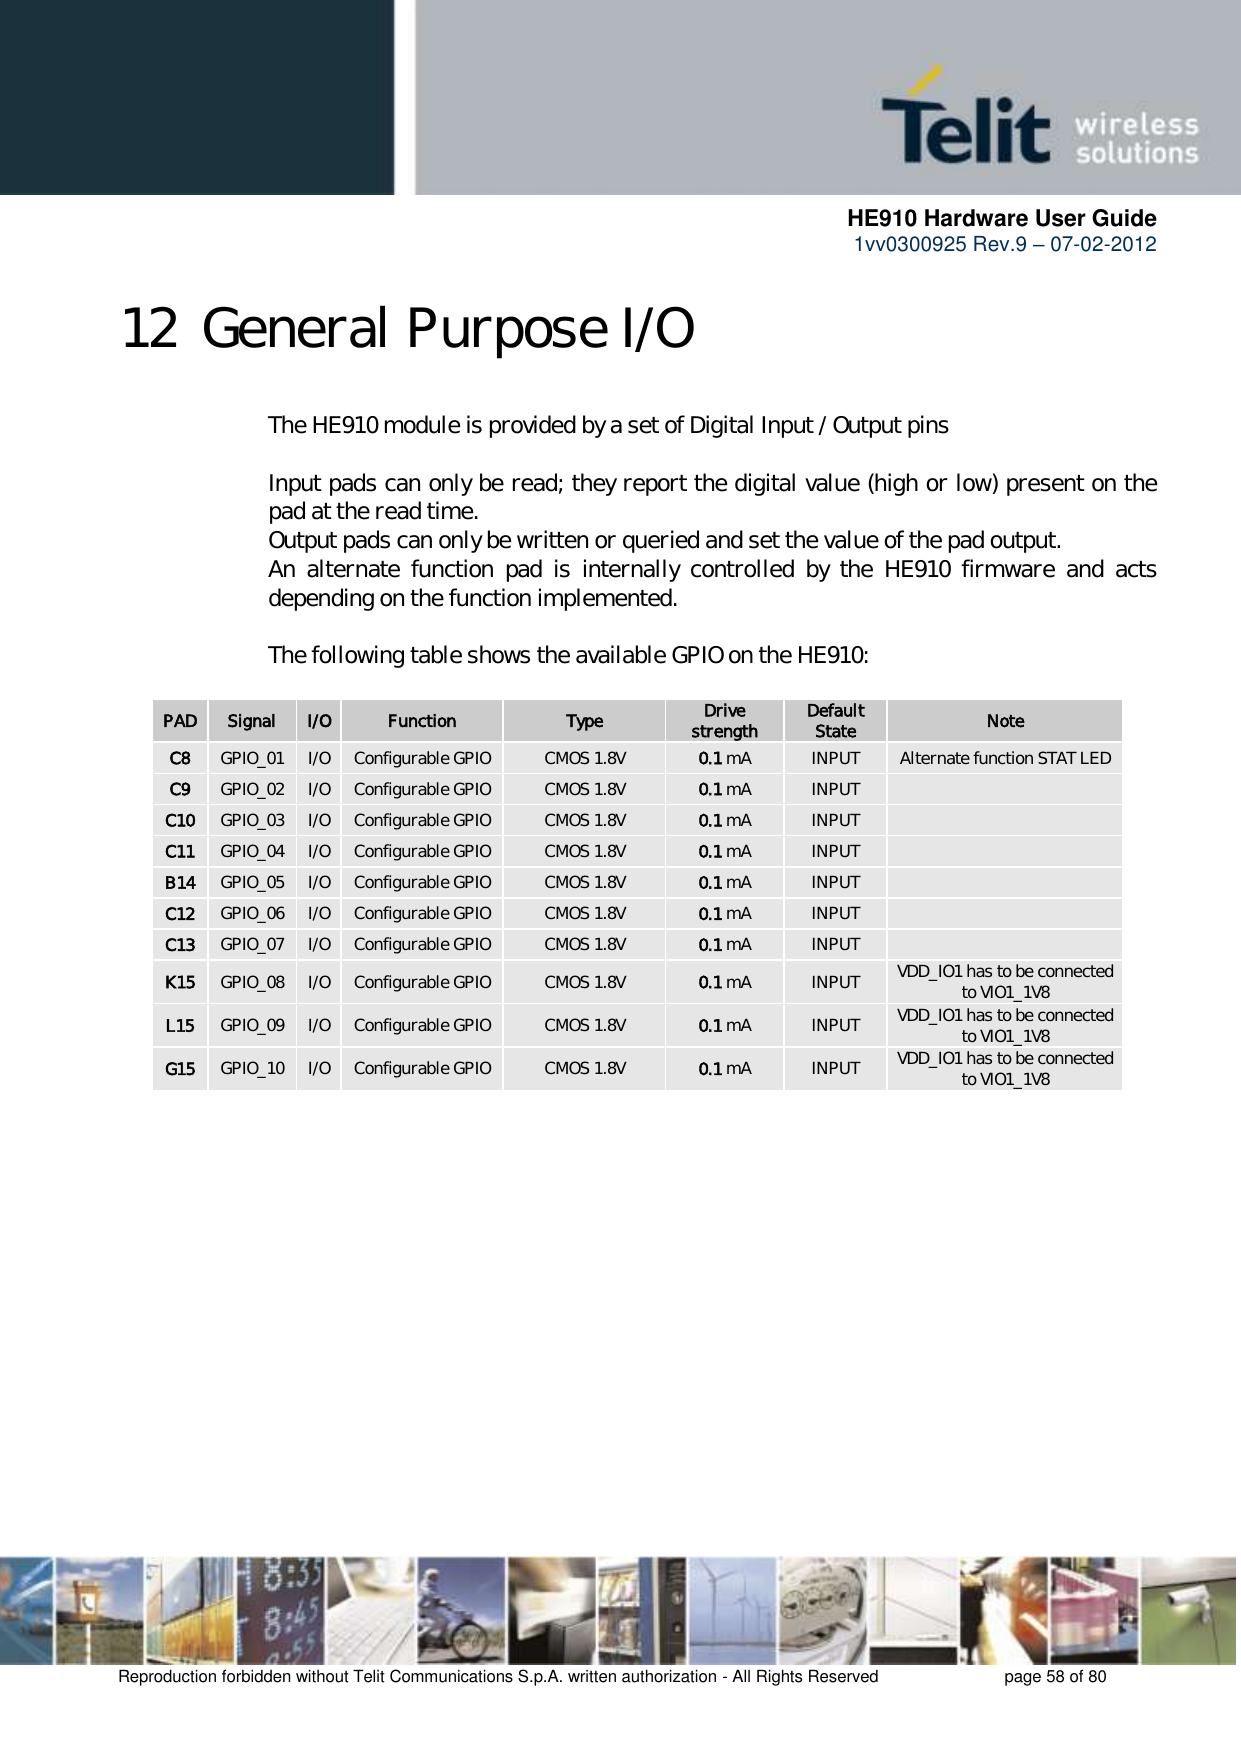      HE910 Hardware User Guide 1vv0300925 Rev.9 – 07-02-2012    Reproduction forbidden without Telit Communications S.p.A. written authorization - All Rights Reserved    page 58 of 80  12 General Purpose I/O The HE910 module is provided by a set of Digital Input / Output pins  Input pads can only be read; they report the digital value (high or low) present on the pad at the read time. Output pads can only be written or queried and set the value of the pad output. An  alternate  function  pad  is  internally  controlled  by  the  HE910  firmware  and  acts depending on the function implemented.    The following table shows the available GPIO on the HE910:  PAD Signal I/O Function Type Drive strength Default State Note C8 GPIO_01 I/O Configurable GPIO CMOS 1.8V 0.1 mA INPUT Alternate function STAT LED C9 GPIO_02 I/O Configurable GPIO CMOS 1.8V 0.1 mA INPUT  C10 GPIO_03 I/O Configurable GPIO CMOS 1.8V 0.1 mA INPUT  C11 GPIO_04 I/O Configurable GPIO CMOS 1.8V 0.1 mA INPUT  B14 GPIO_05 I/O Configurable GPIO CMOS 1.8V 0.1 mA INPUT  C12 GPIO_06 I/O Configurable GPIO CMOS 1.8V 0.1 mA INPUT  C13 GPIO_07 I/O Configurable GPIO CMOS 1.8V 0.1 mA INPUT  K15 GPIO_08 I/O Configurable GPIO CMOS 1.8V 0.1 mA INPUT VDD_IO1 has to be connected to VIO1_1V8 L15 GPIO_09 I/O Configurable GPIO CMOS 1.8V 0.1 mA INPUT VDD_IO1 has to be connected to VIO1_1V8 G15 GPIO_10 I/O Configurable GPIO CMOS 1.8V 0.1 mA INPUT VDD_IO1 has to be connected to VIO1_1V8   